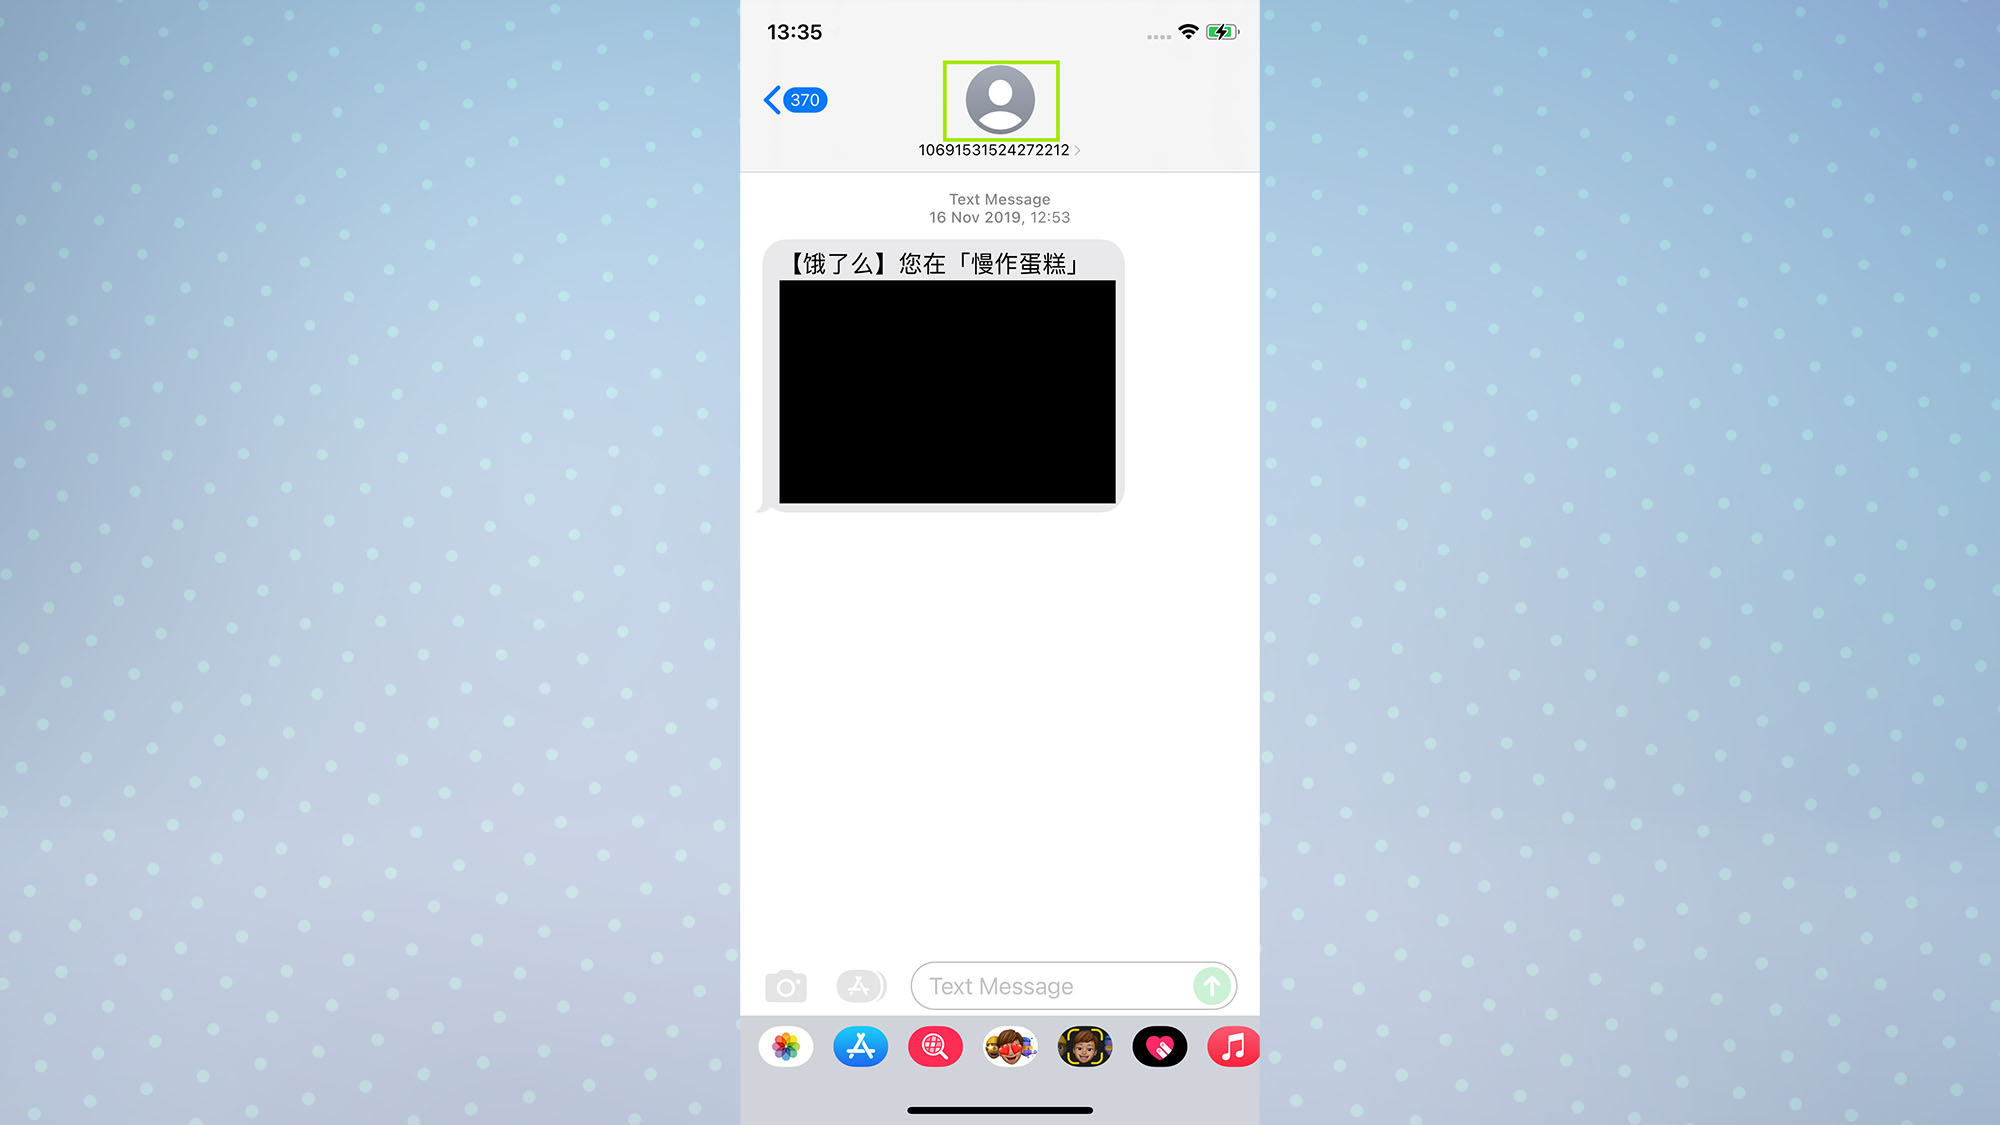 A screenshot of an iPhone screen showing the Messages app with a profile icon highlighted